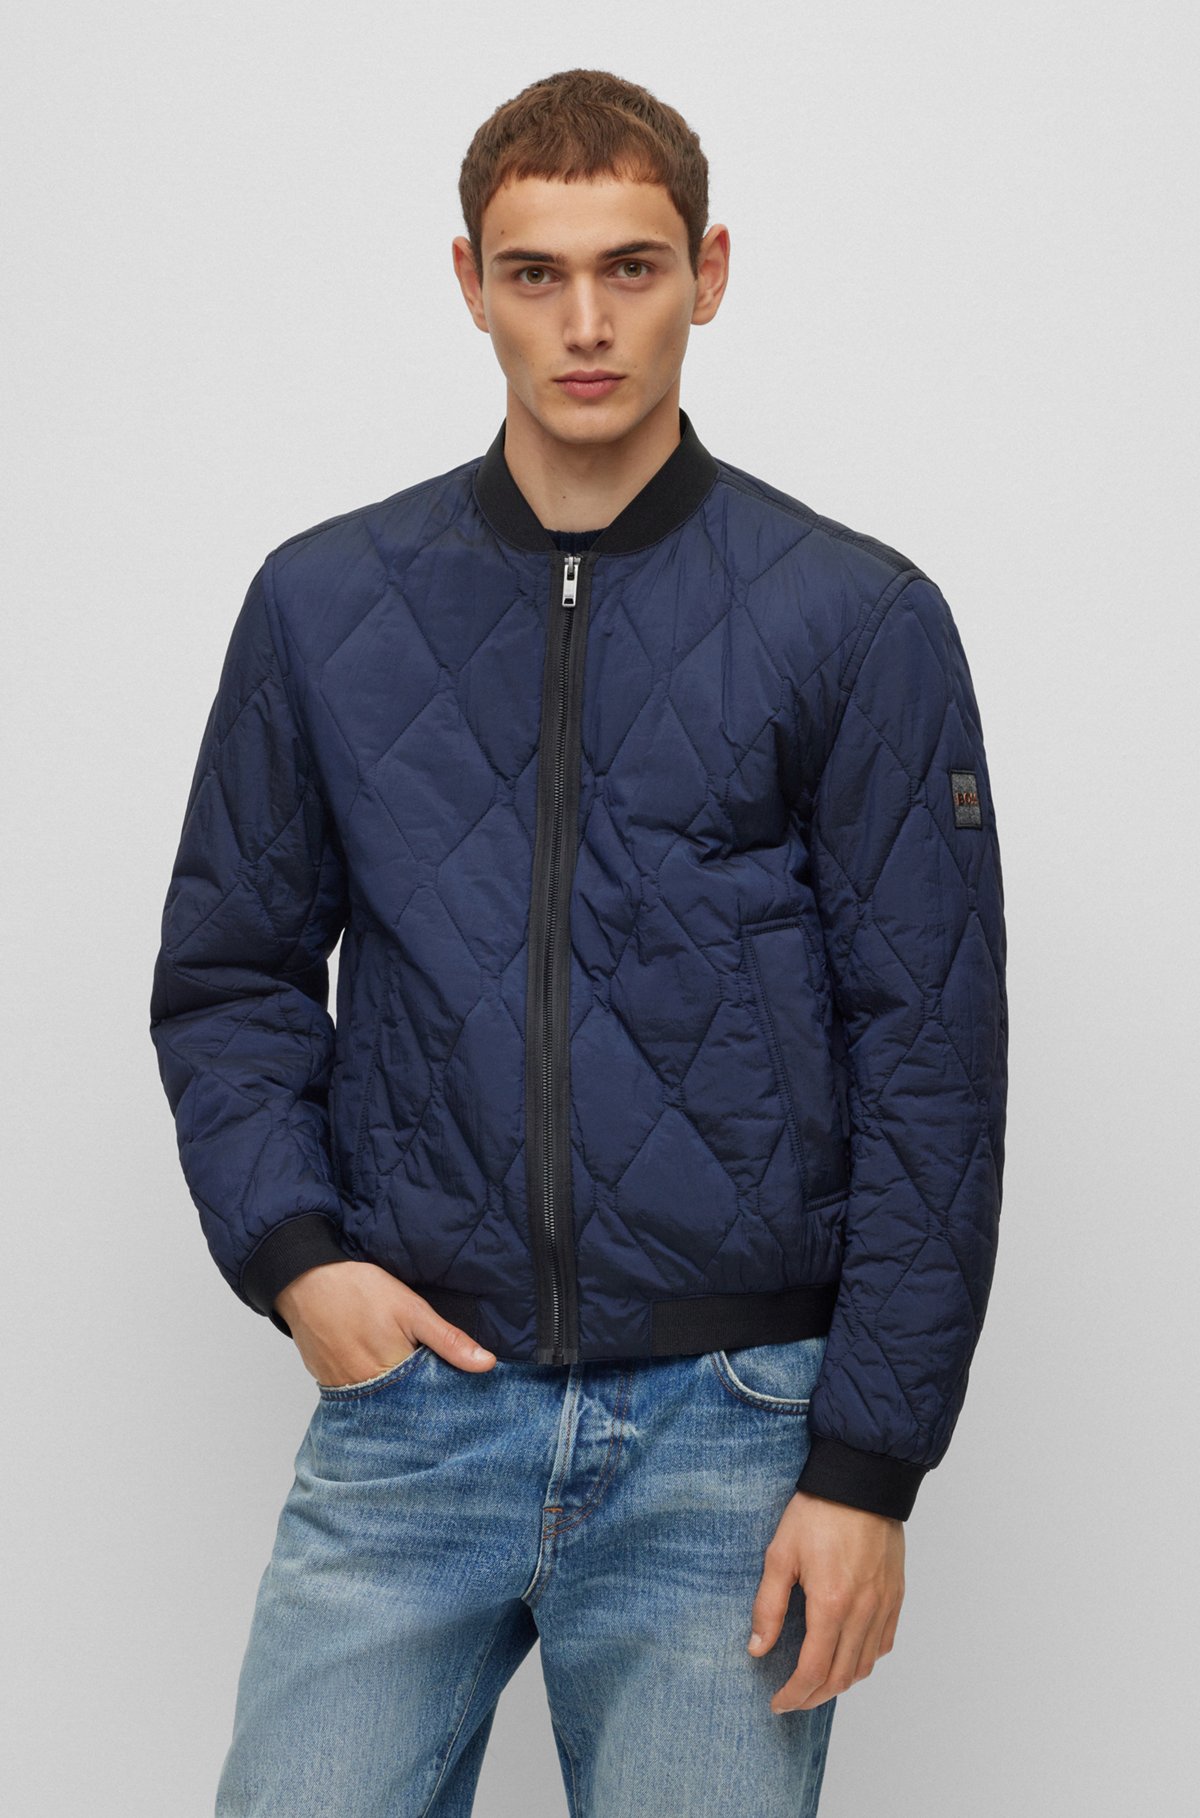 BOSS - Logo-badge bomber jacket in quilted metallic-effect material